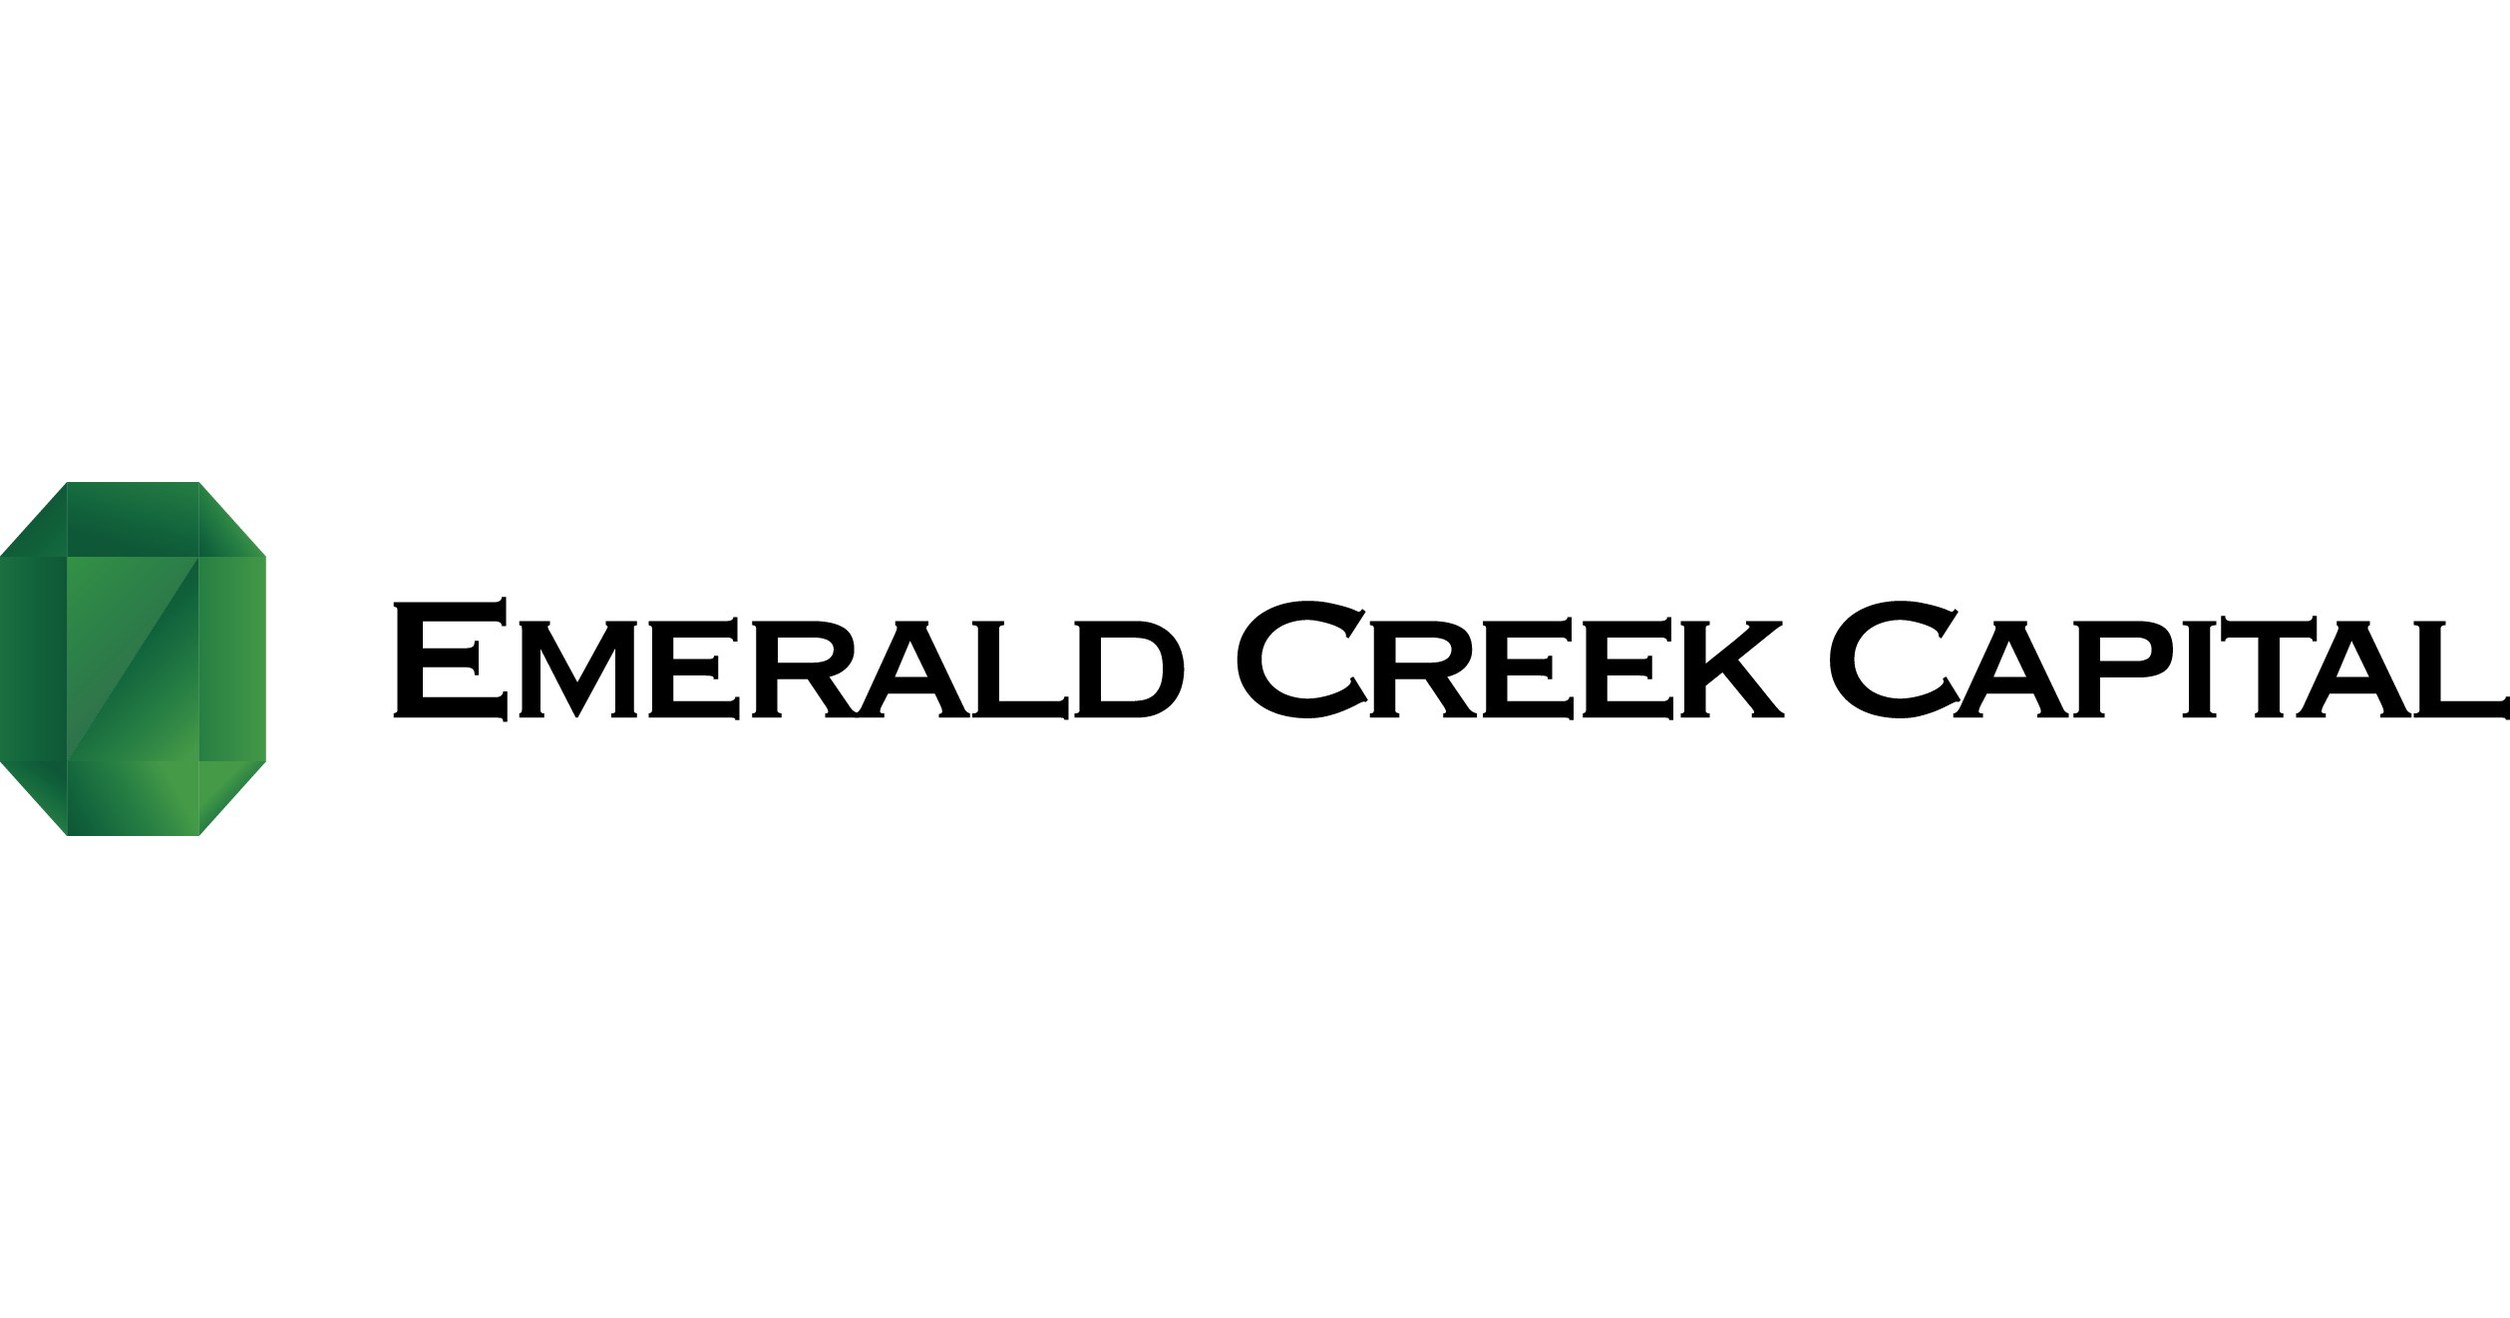  Emerald Creek Capital Announces Successful Launch of Equity Investment Fund 